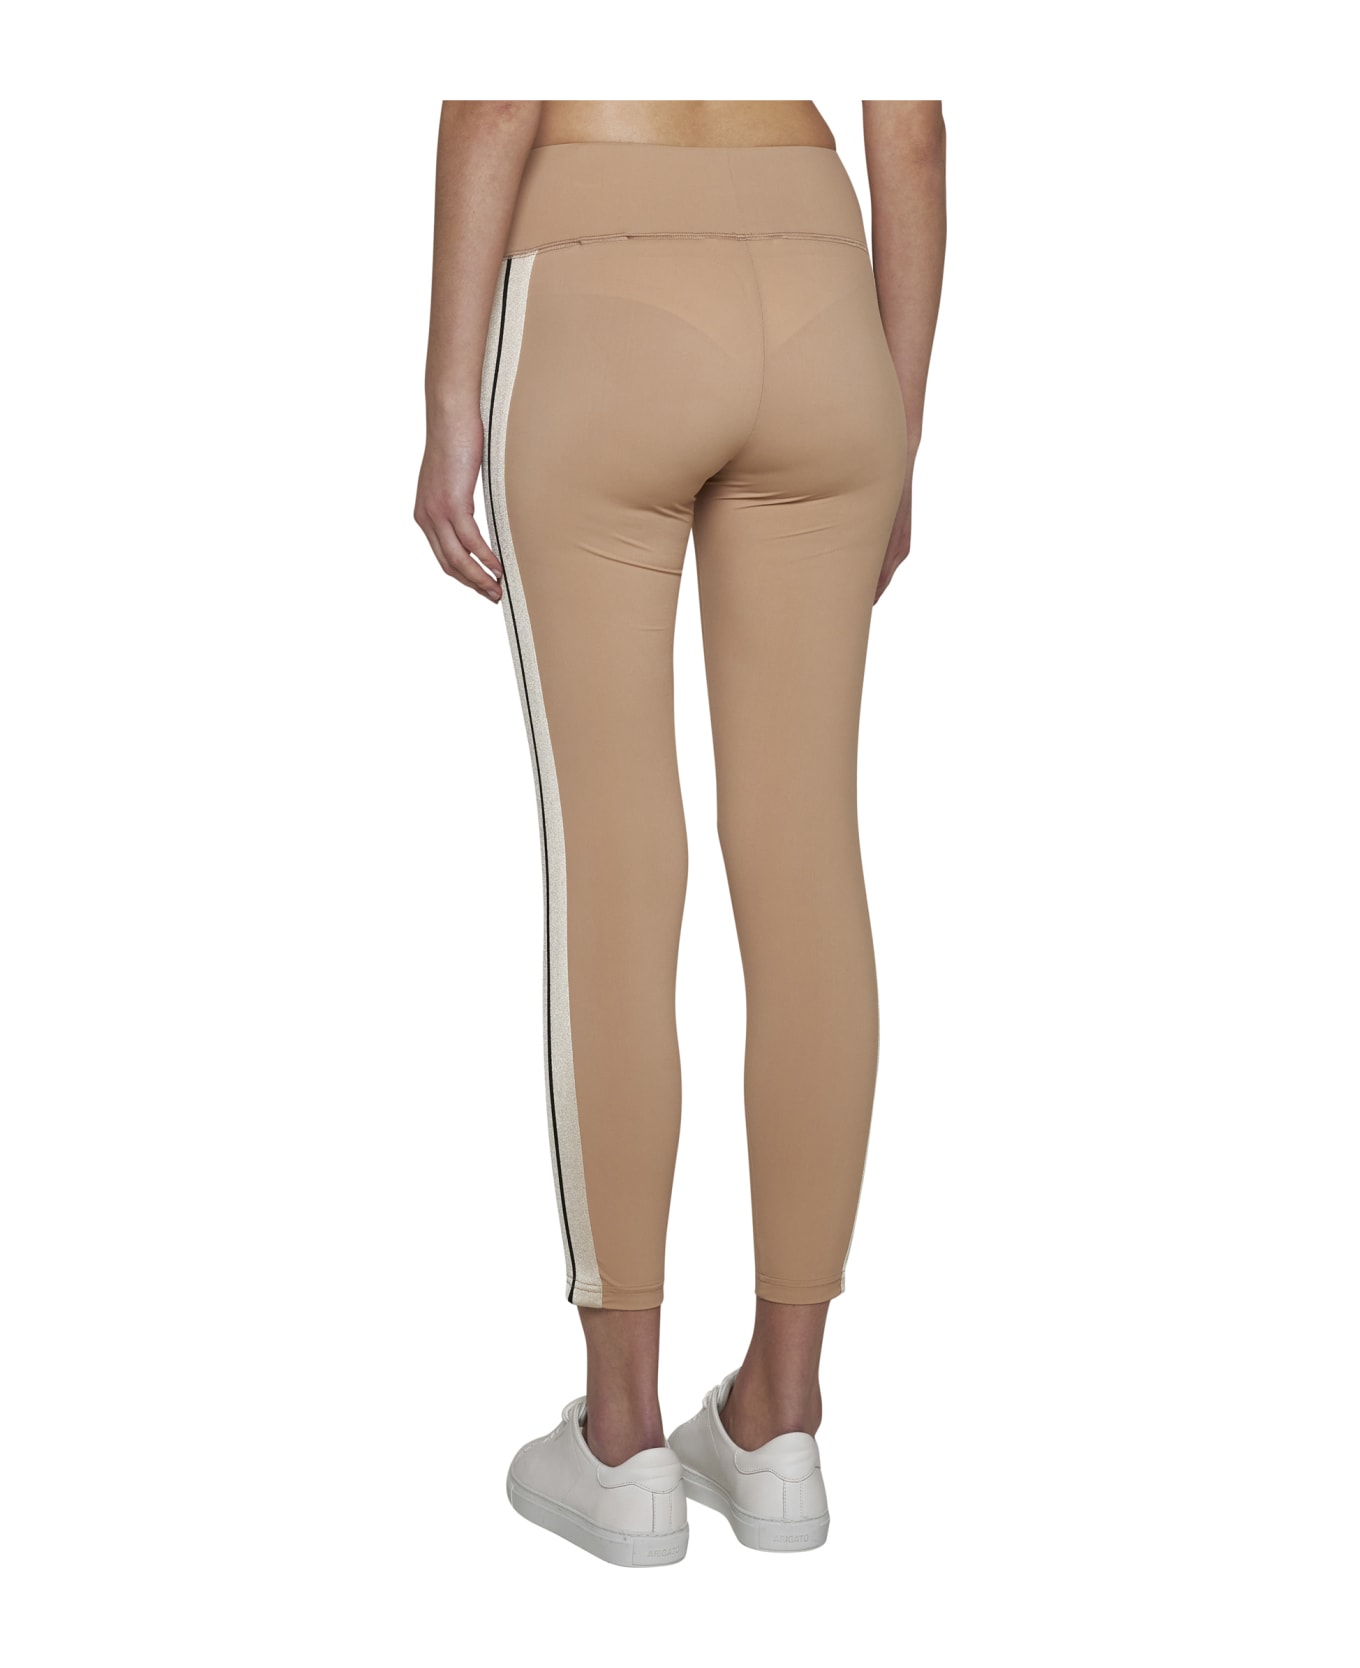 Palm Angels Pants - Nude off white レギンス